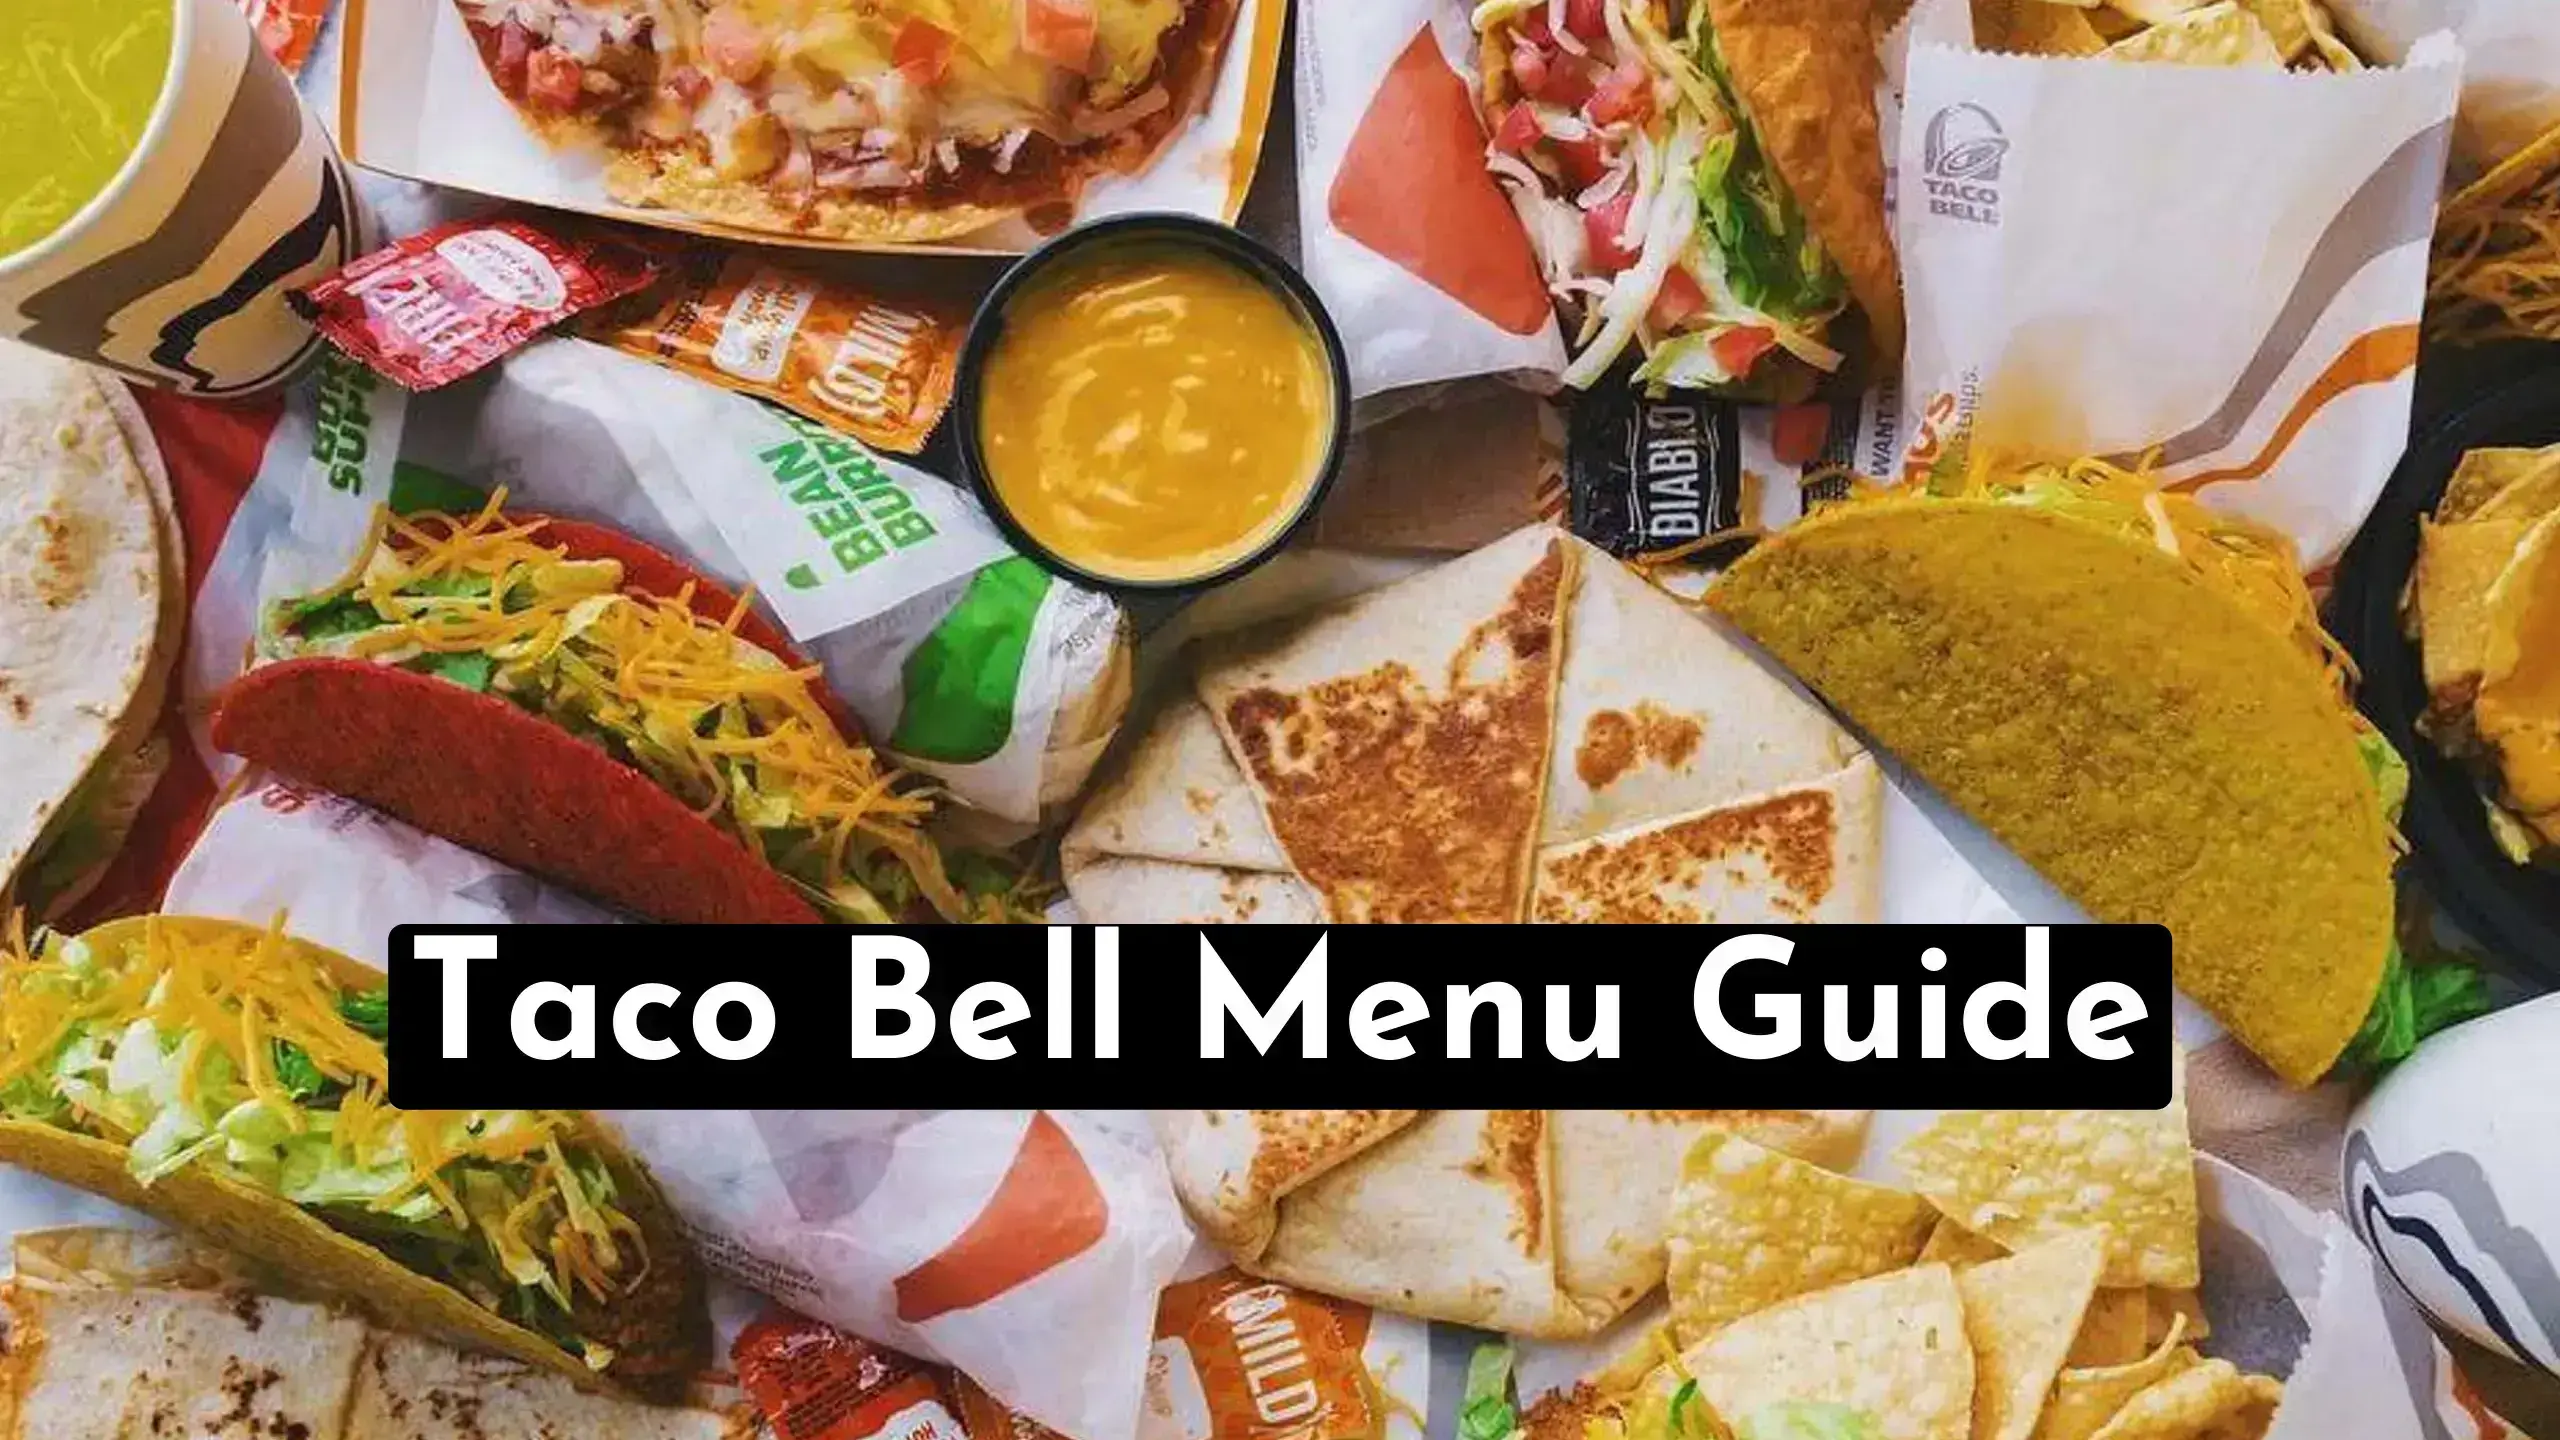 A Delicious Journey Towards Taco Bell Menu Guide | Also Find Taco Bell Breakfast, Vegetarian & Drink Menus With Related FAQs | store-hour.com